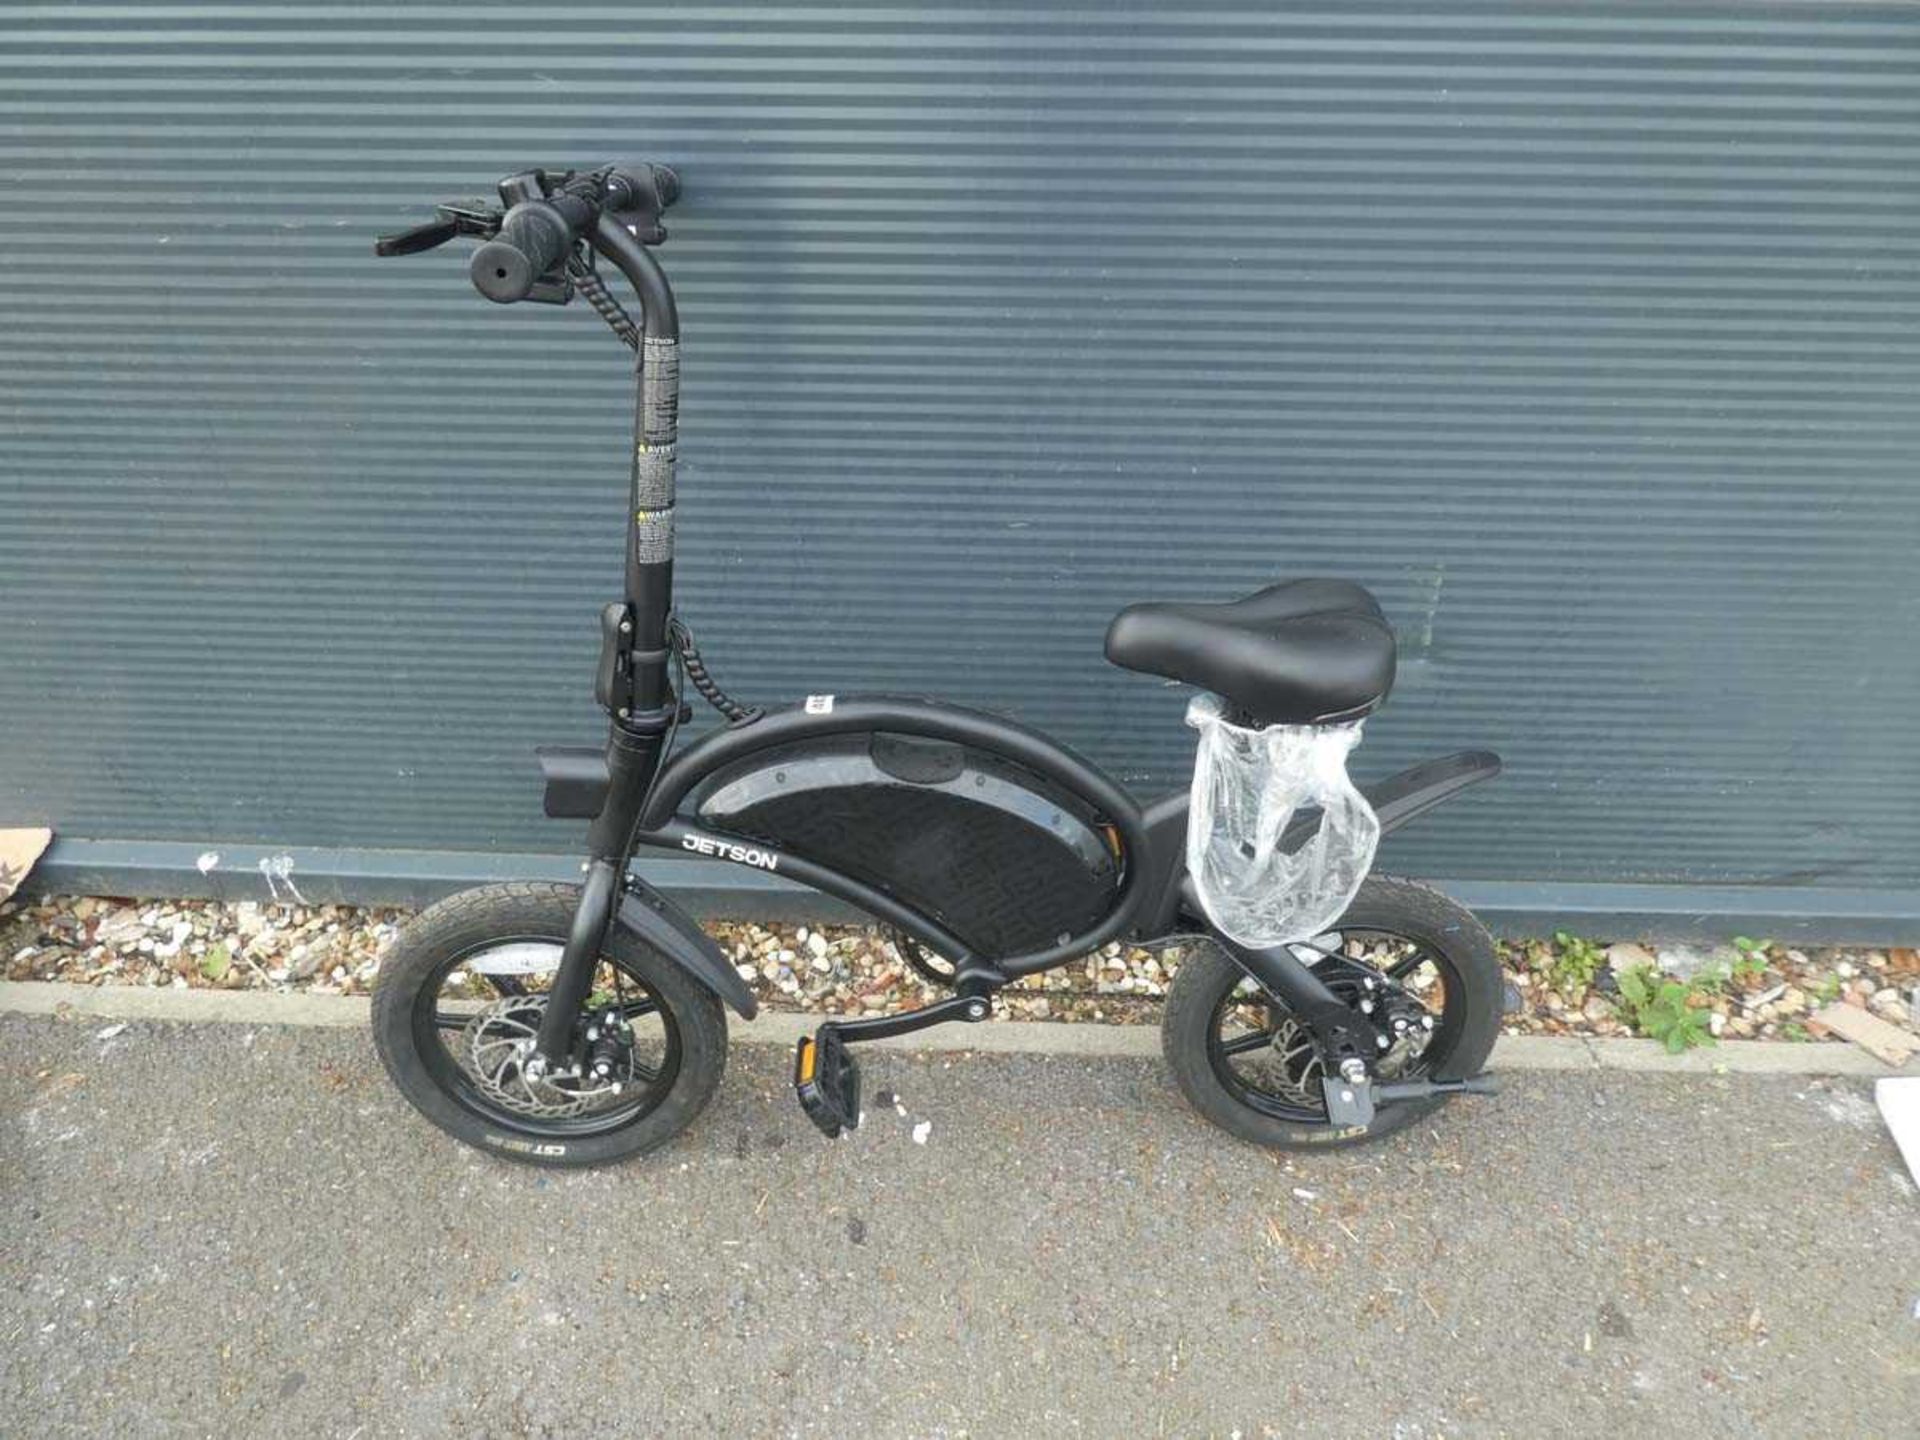 Jetson Bolt electric bike with charger